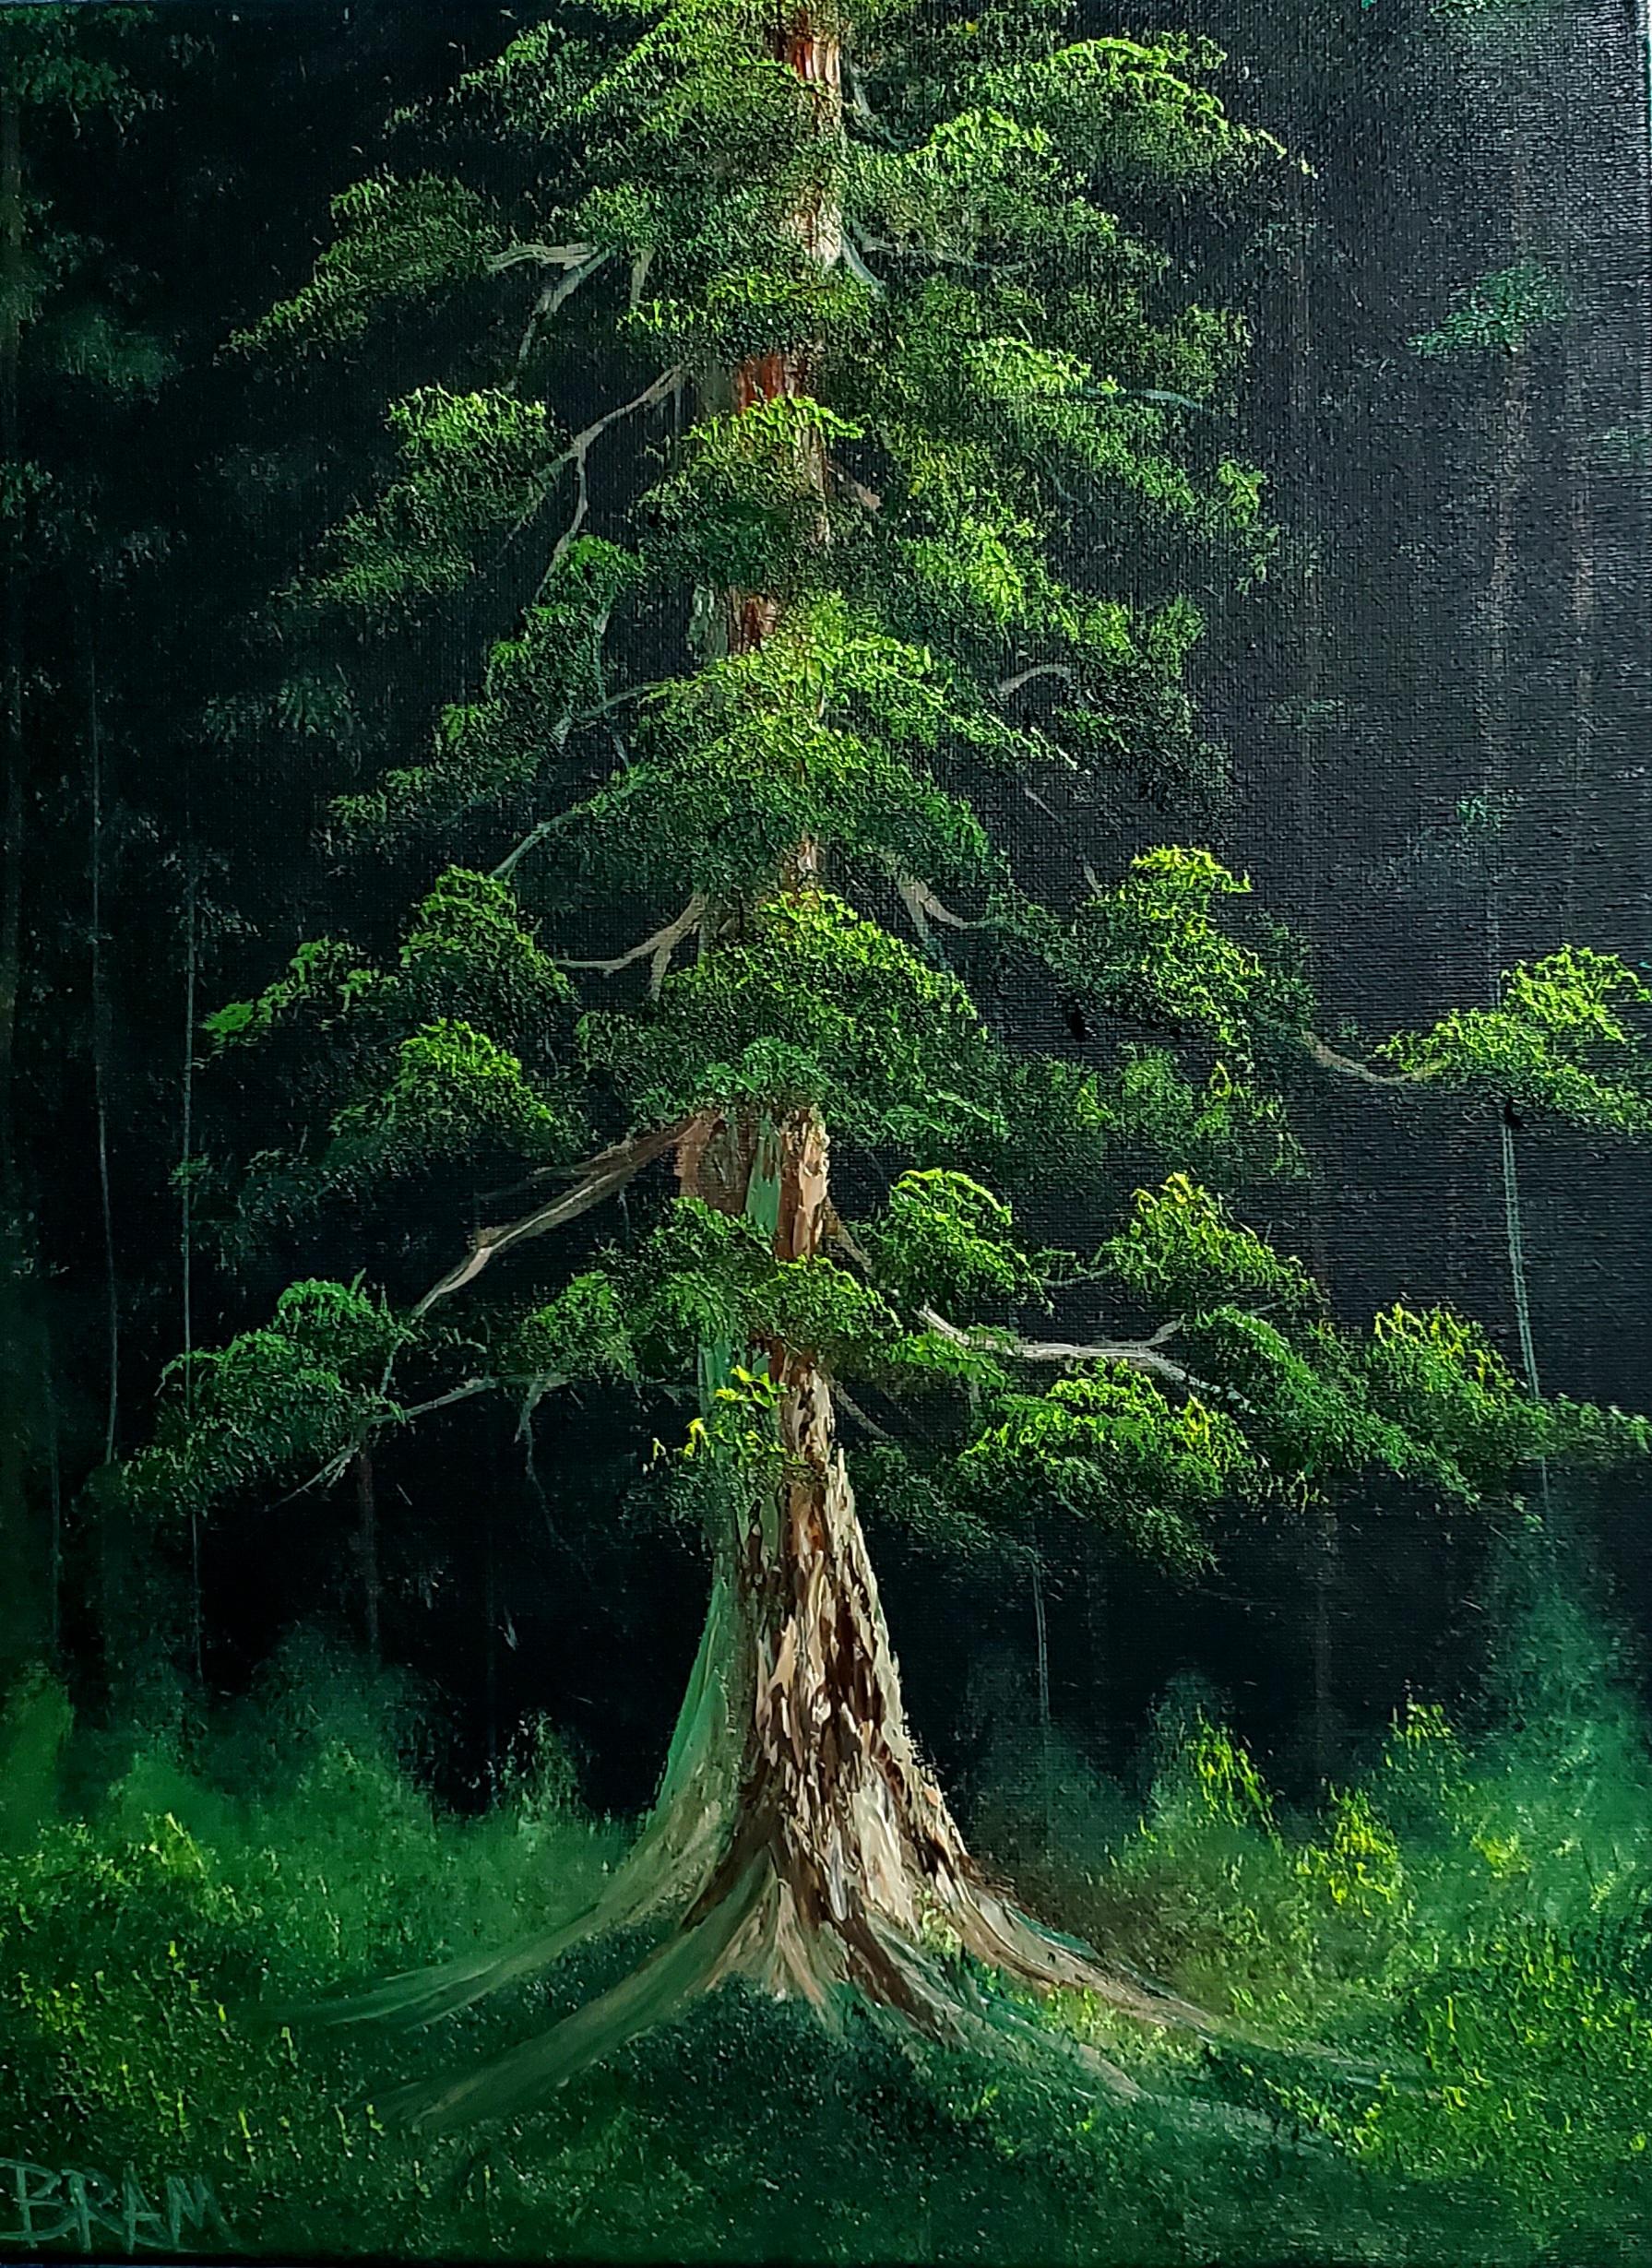 A mountainous and contented Bob Ross model tree I true painted.